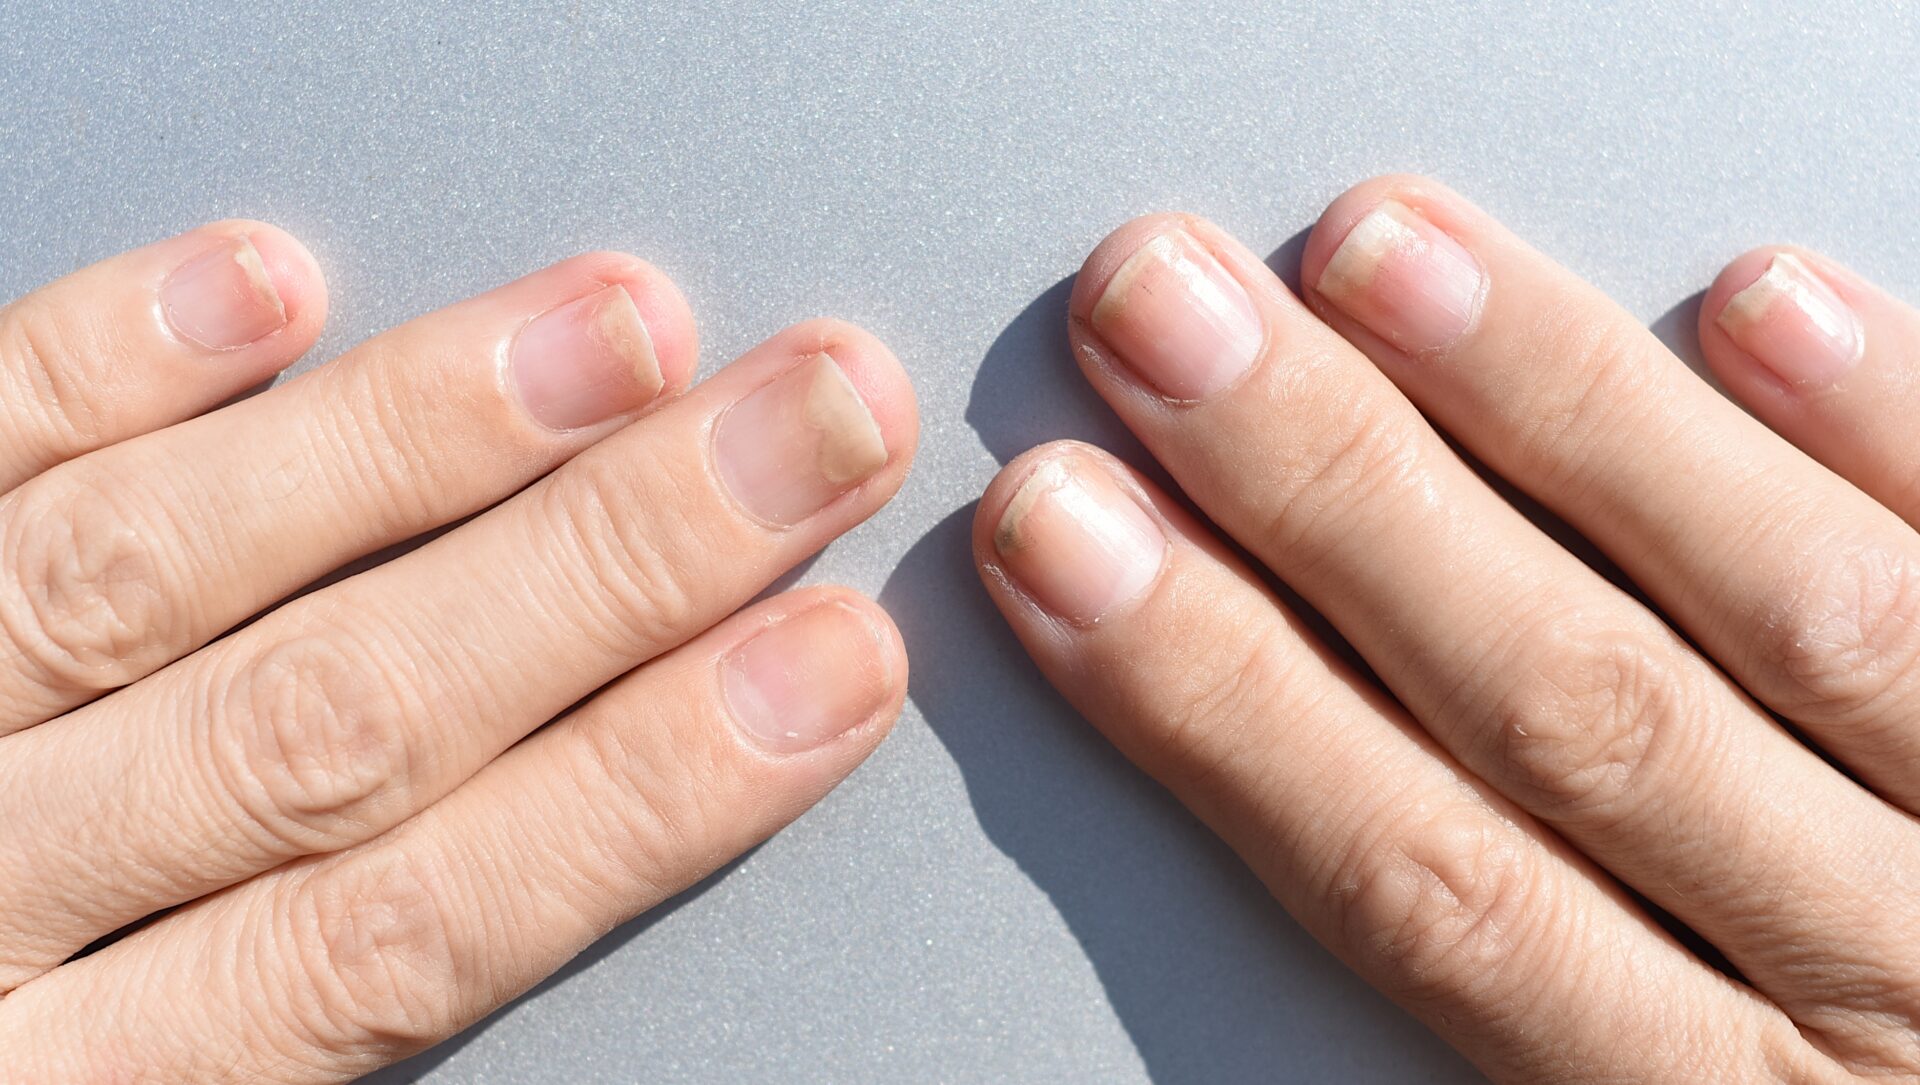 Nail Clinic: Help Clients With Arthritis | Nailpro